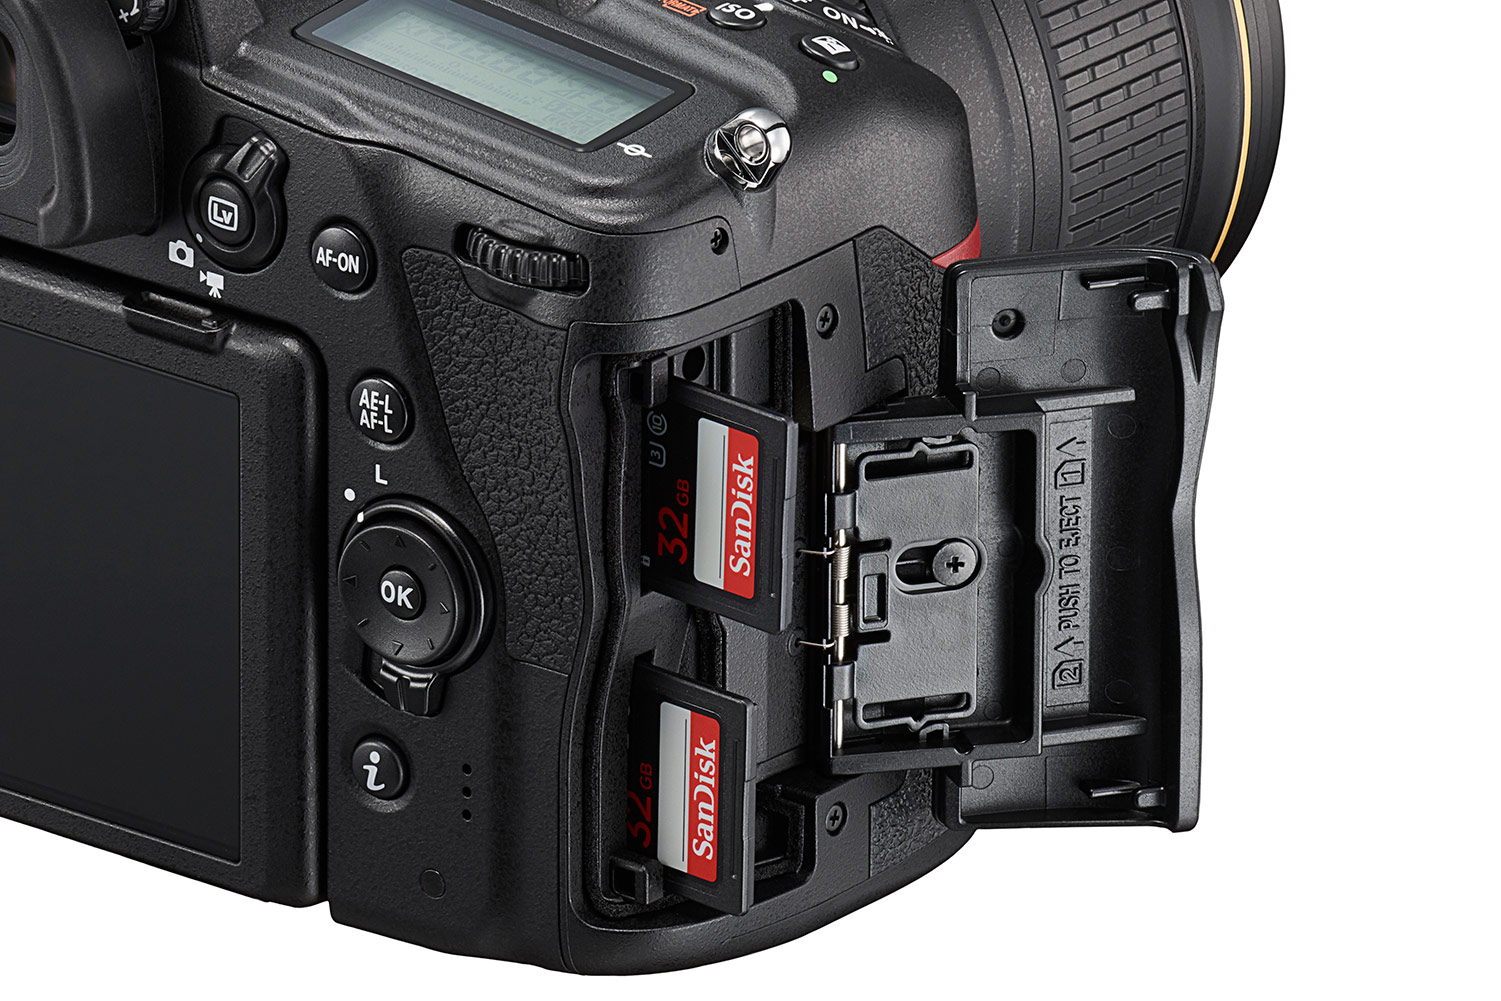 nikon d780 long awaited successor to d750 is here ces 2020 dual sd card slots press image